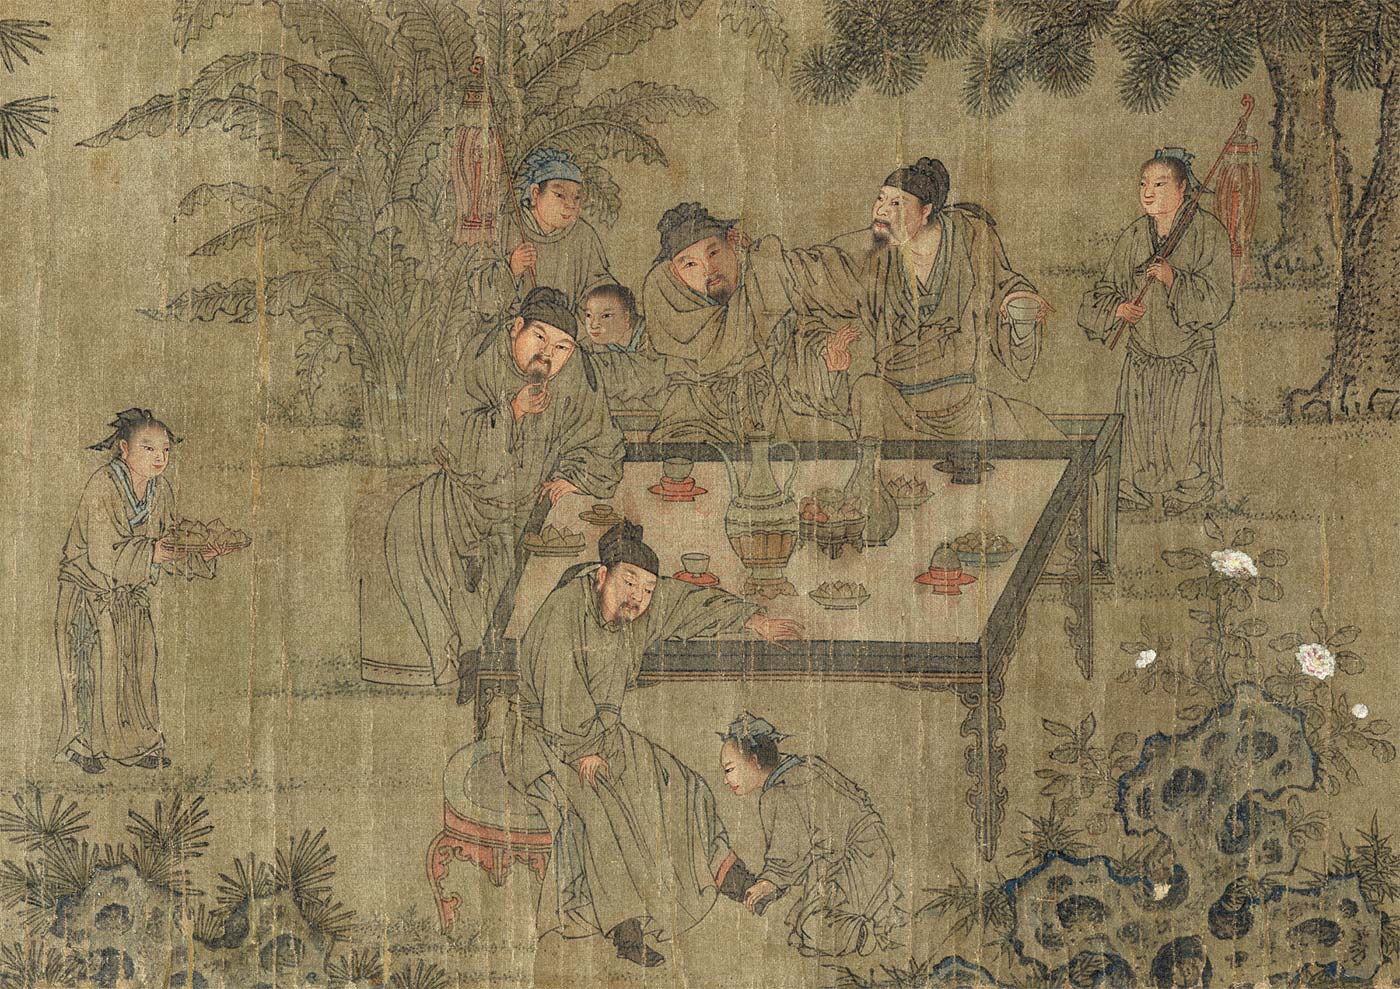 Yuan dynasty, 1260–1368; Evening Literary Gathering (detail). Handscroll; ink and color on silk, 26.2 x 160 cm. Private collection. Photograph: Chiu Lem